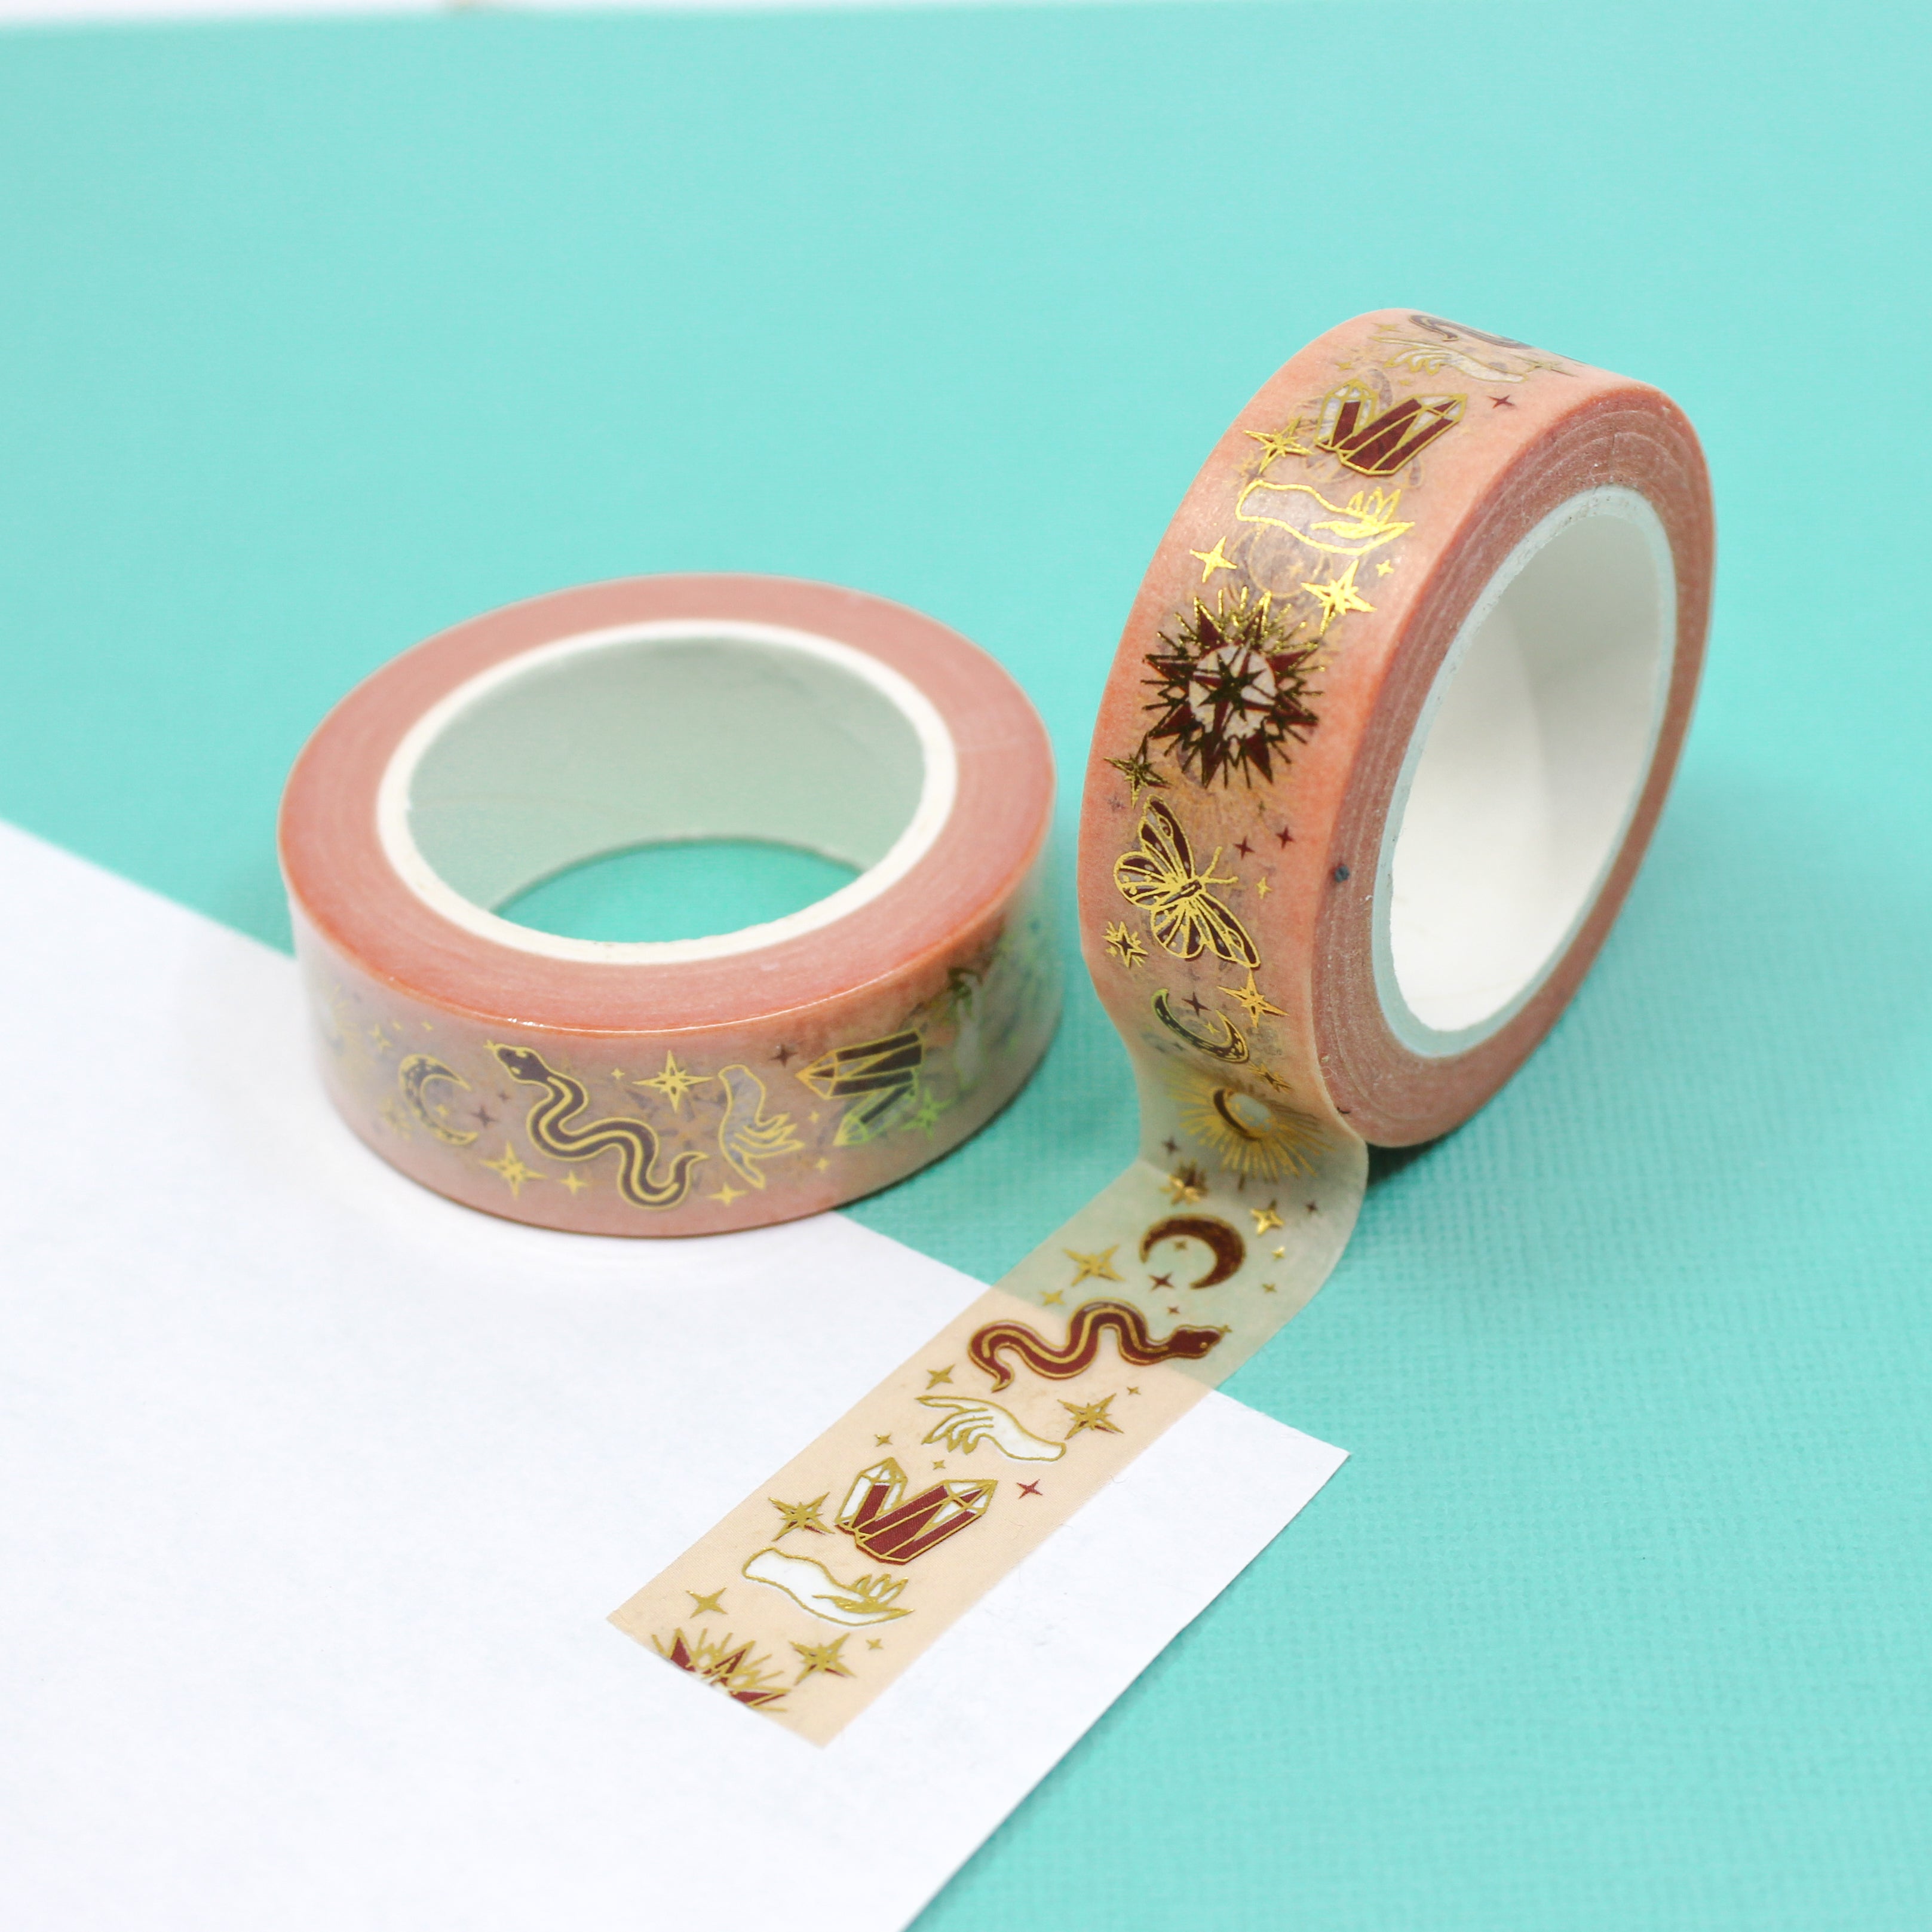 This is a collection of spiritual symbols view themed washi tape from BBB Supplies Craft Shop